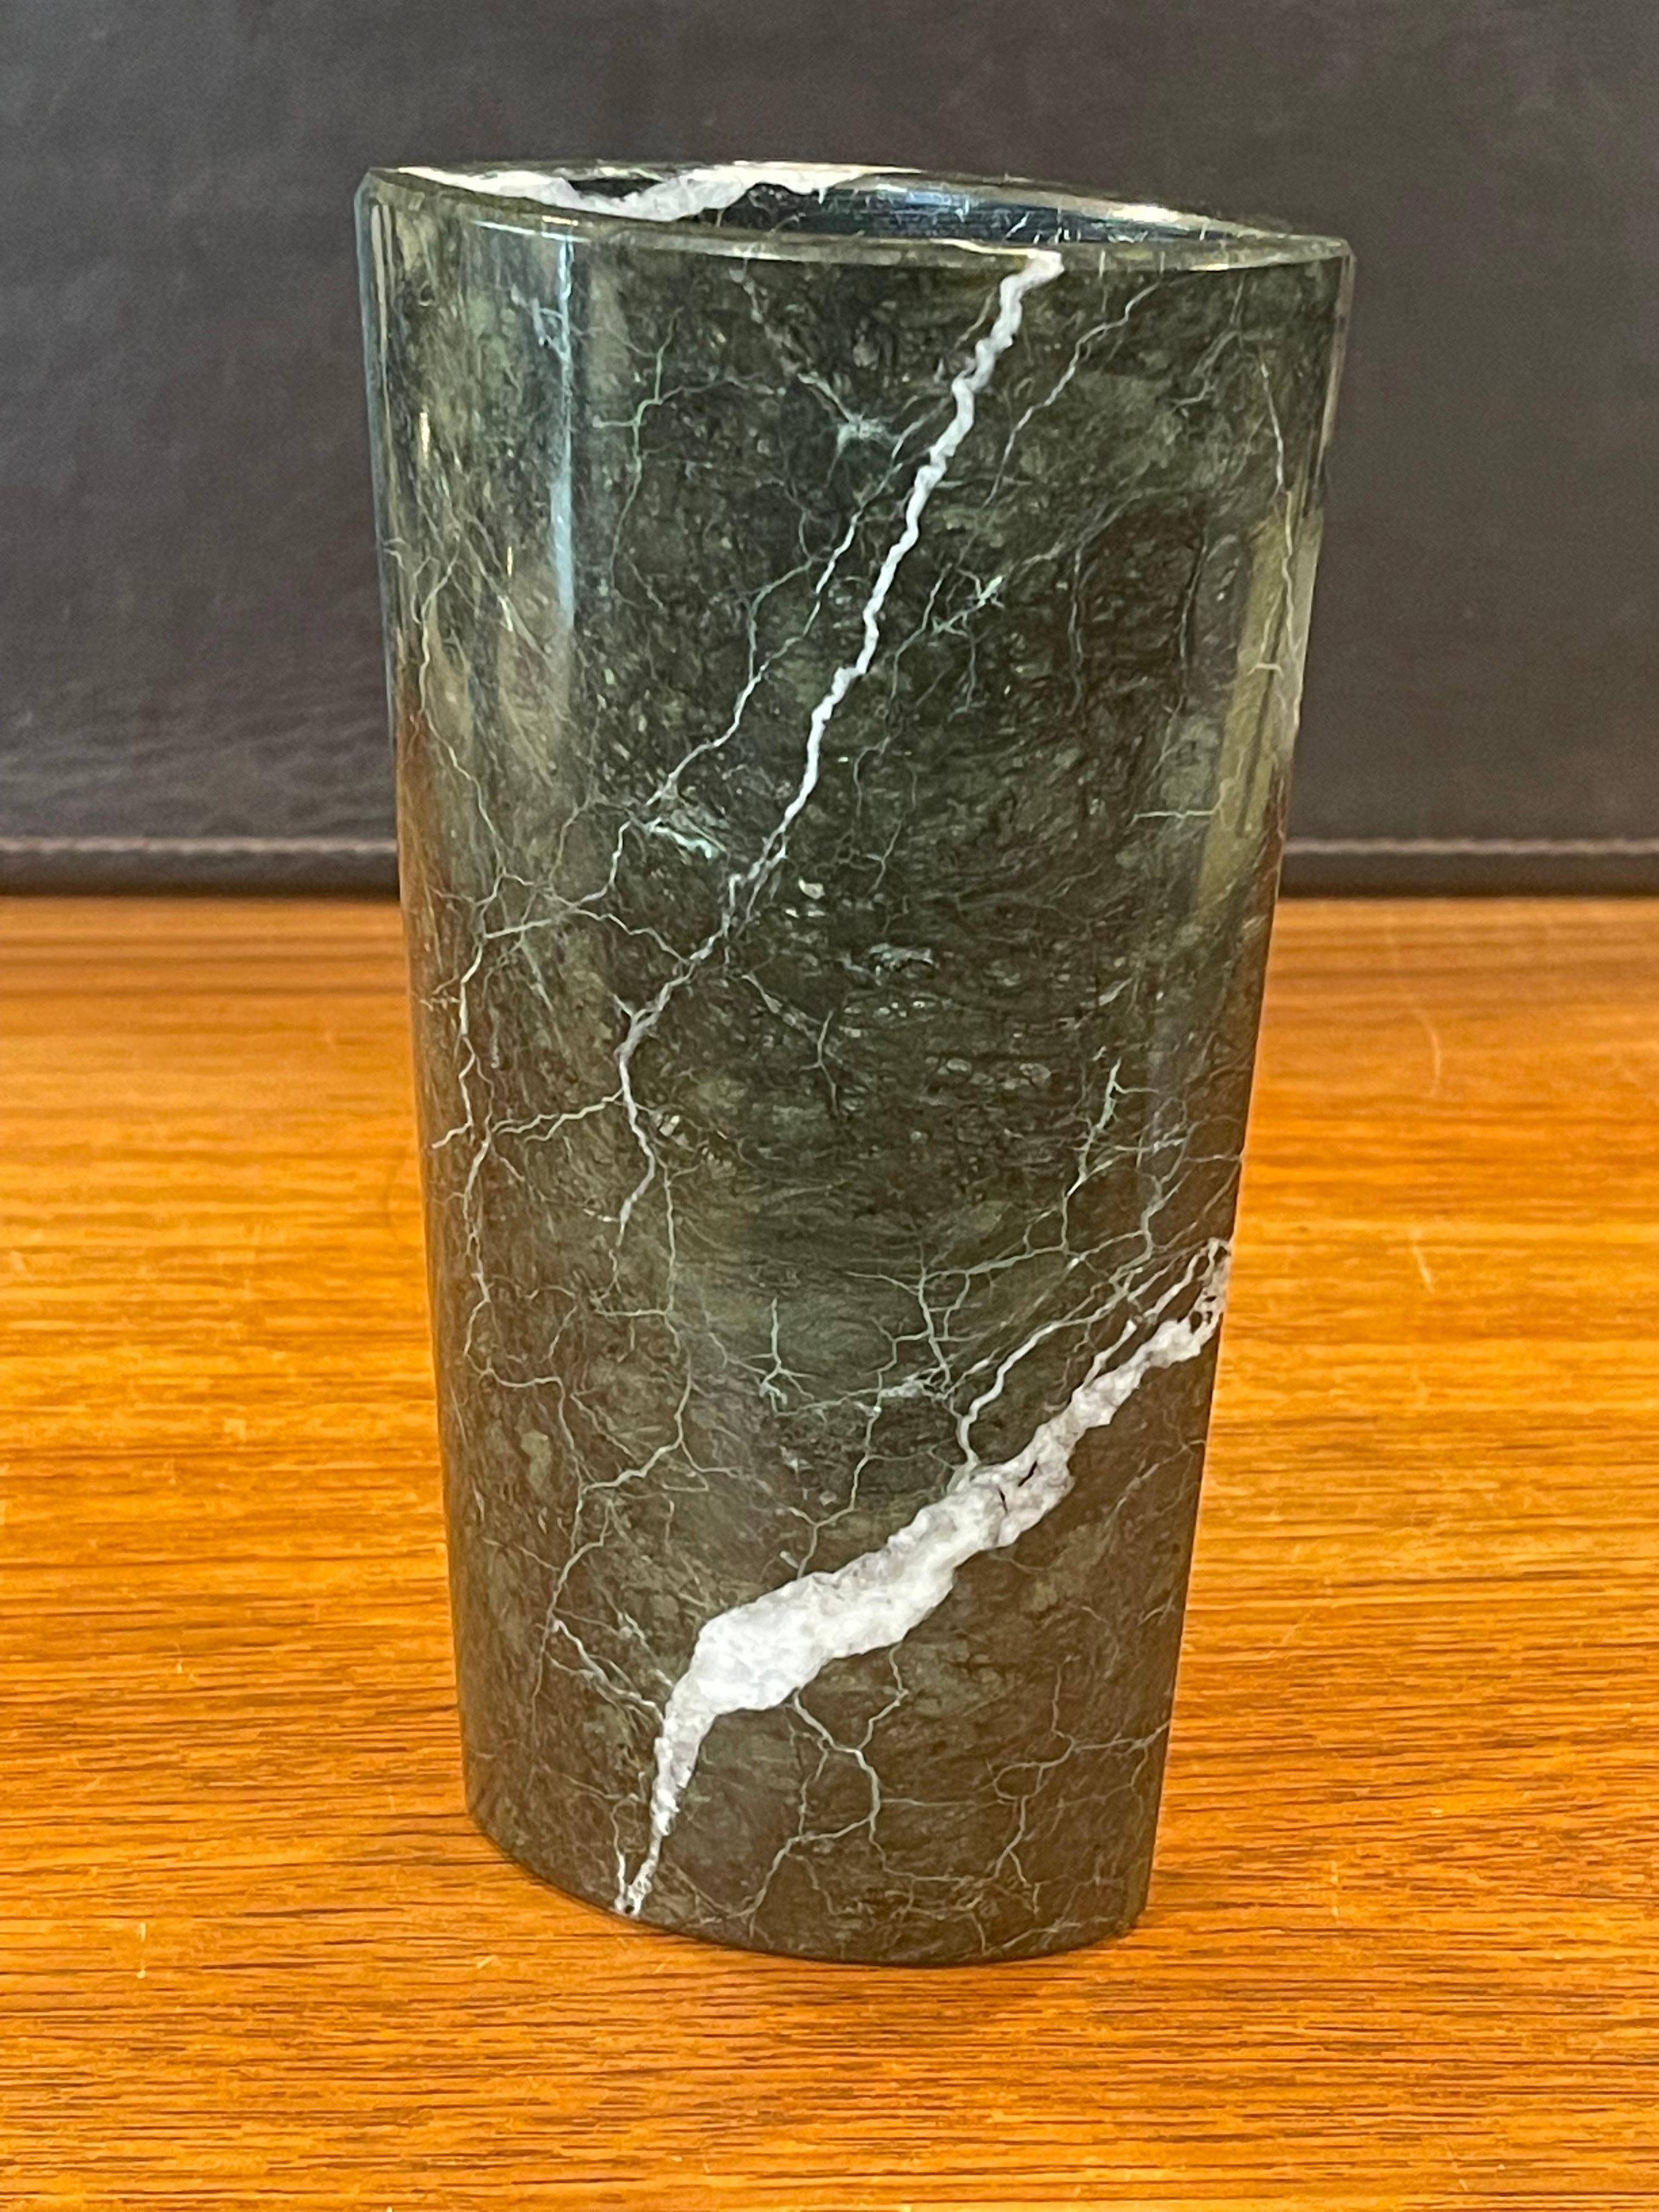 Gorgeous petite post-modern Italian marble vase, circa 1970s. Striking black and white flecking throughout the dark green background on this piece. The vase is in very good vintage condition with no chips or cracks and measures 3.75